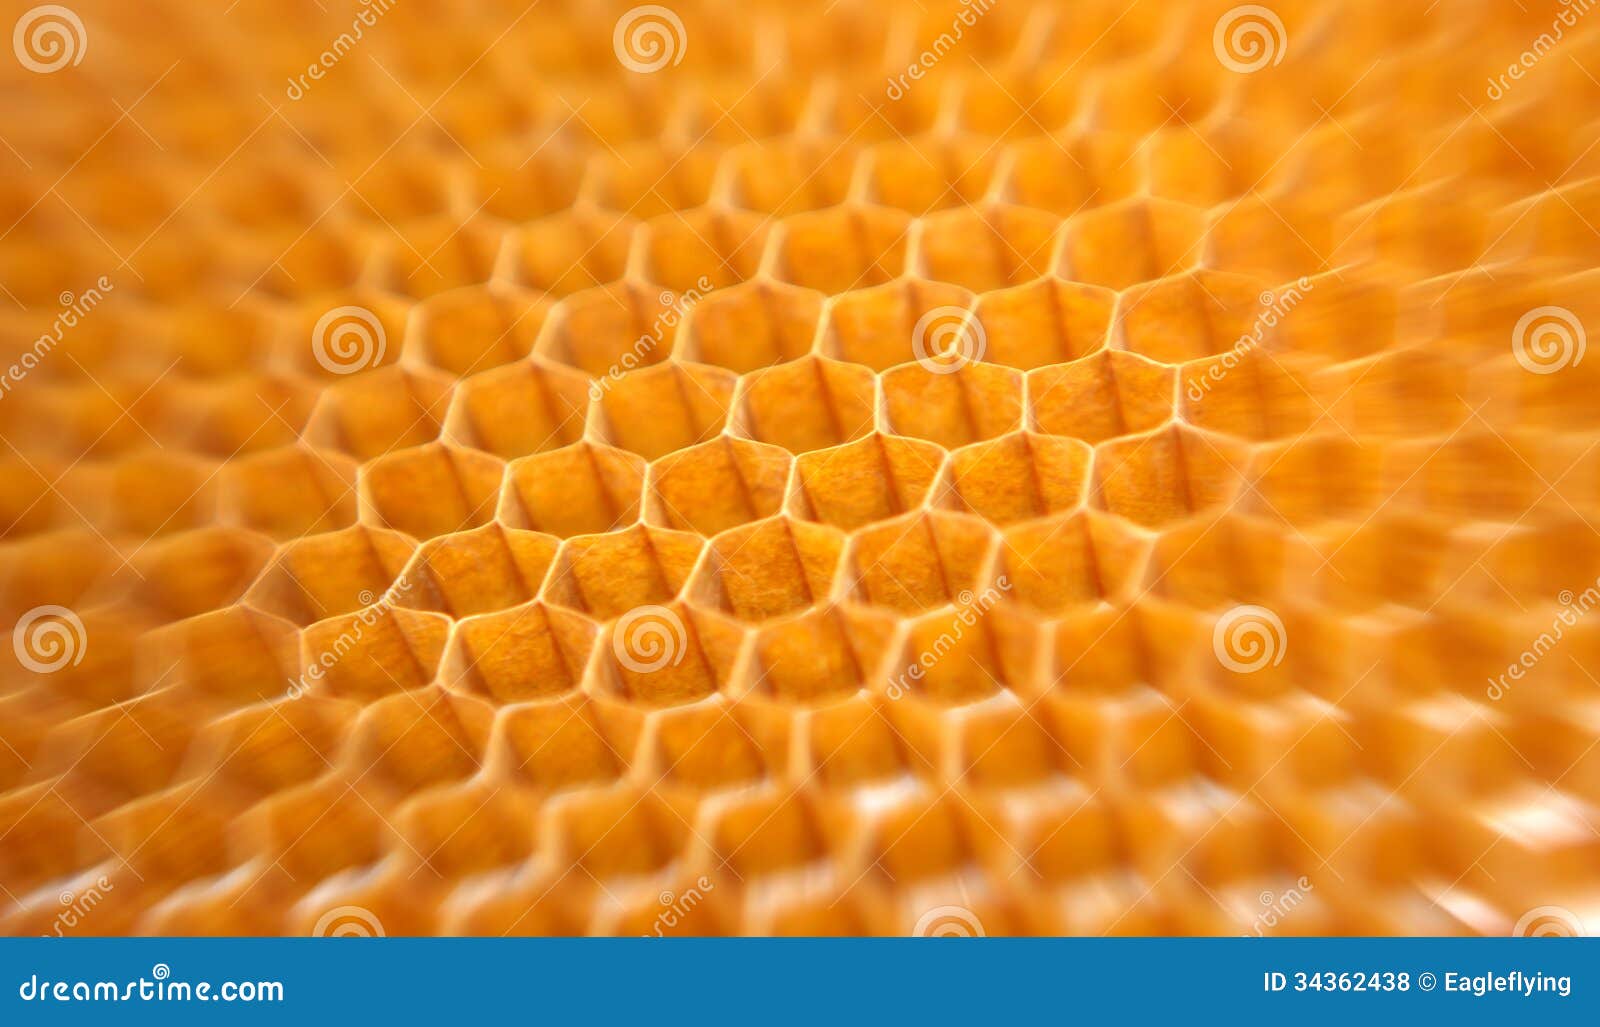 honeycomb structure for aerospace industry